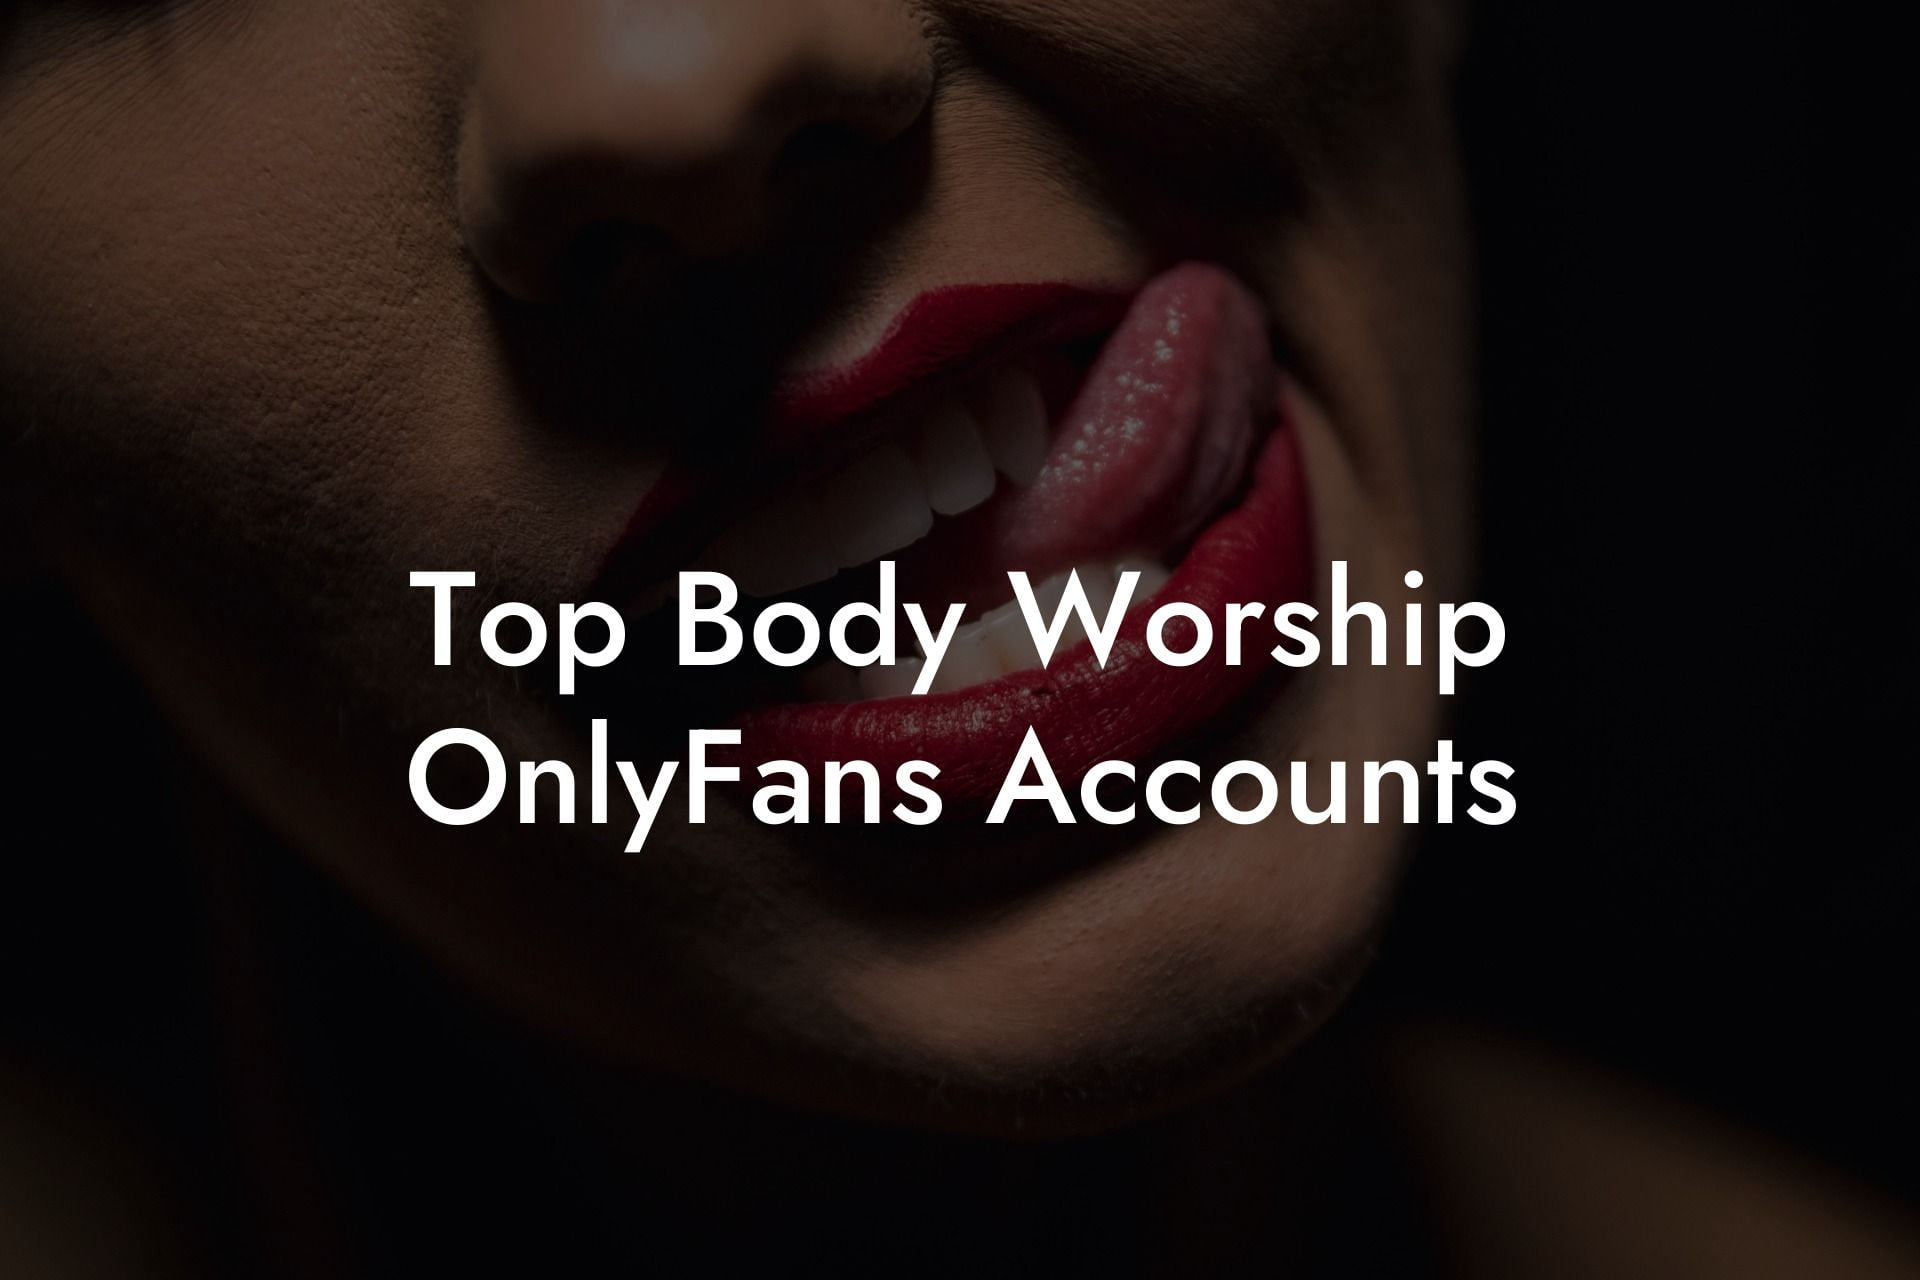 Top Body Worship OnlyFans Accounts